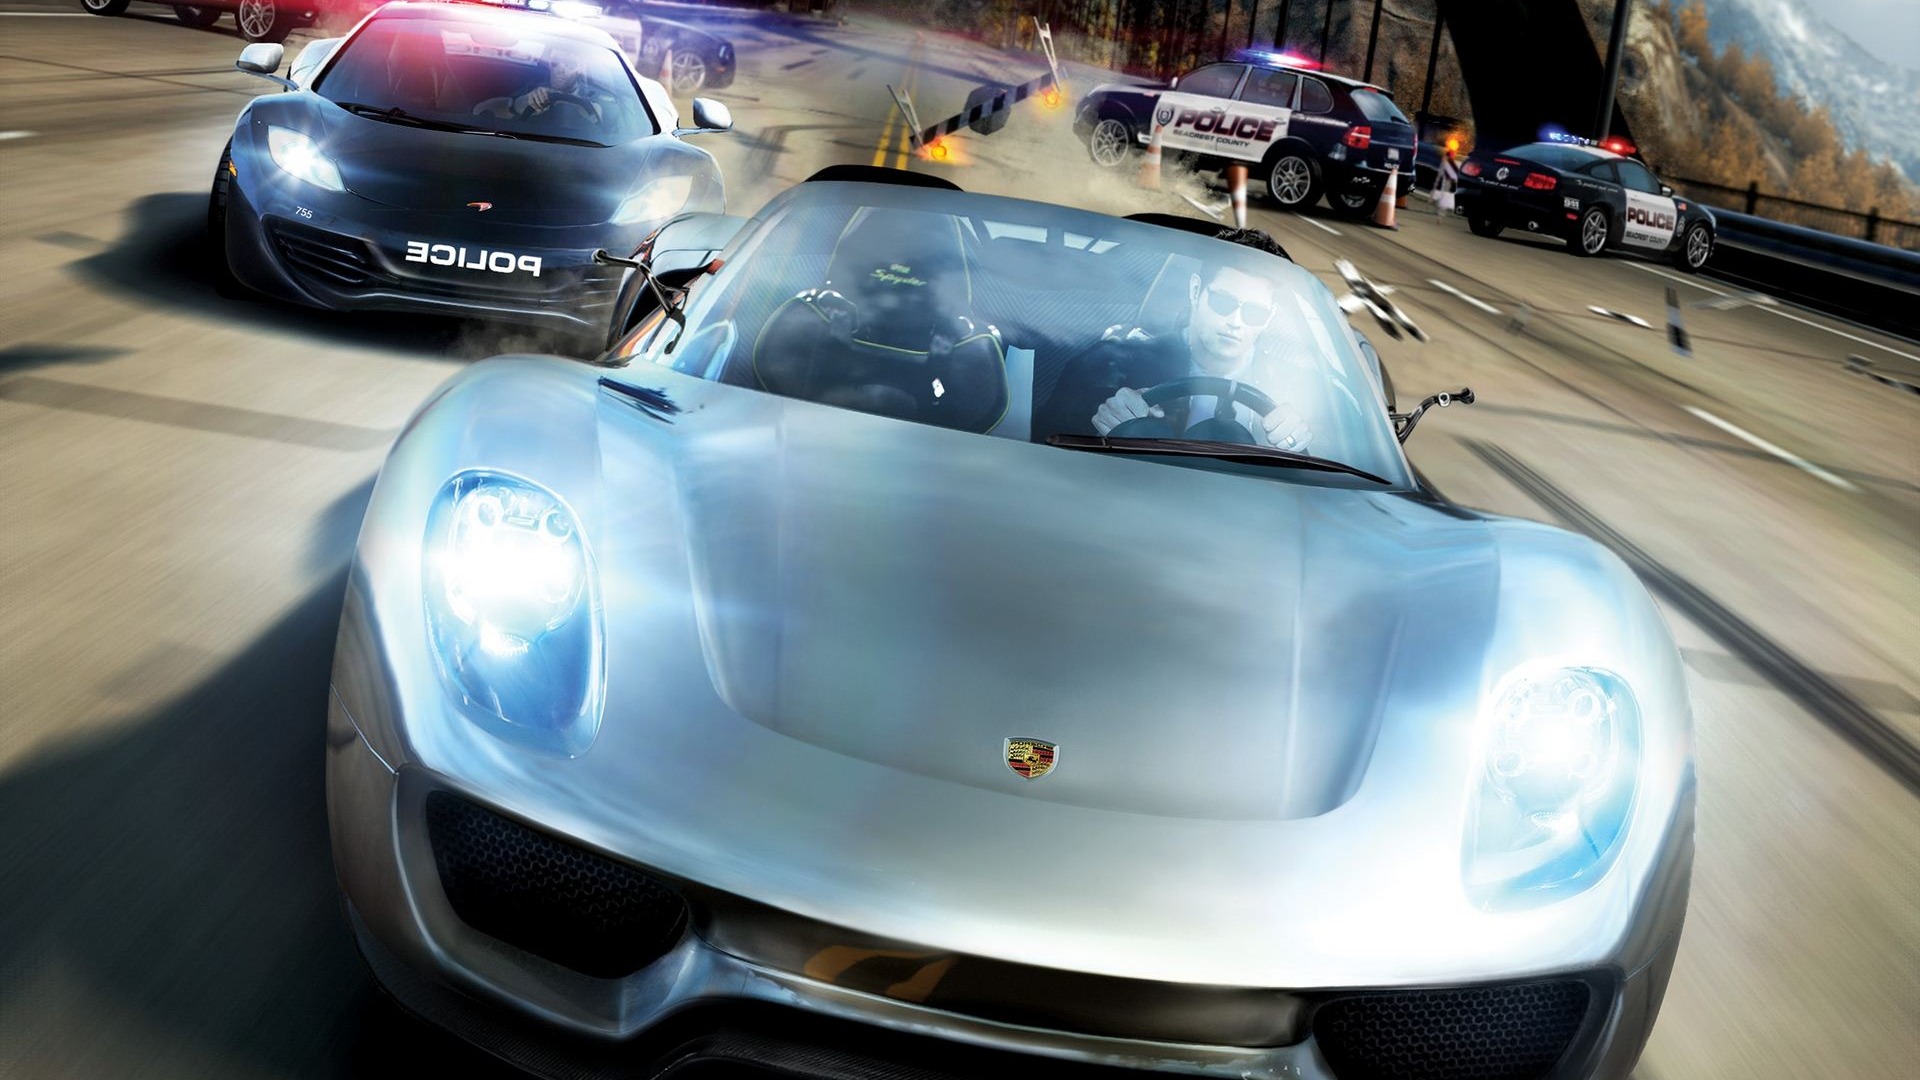 Need for Speed: Hot Pursuit 極品飛車14：熱力追踪 #4 - 1920x1080